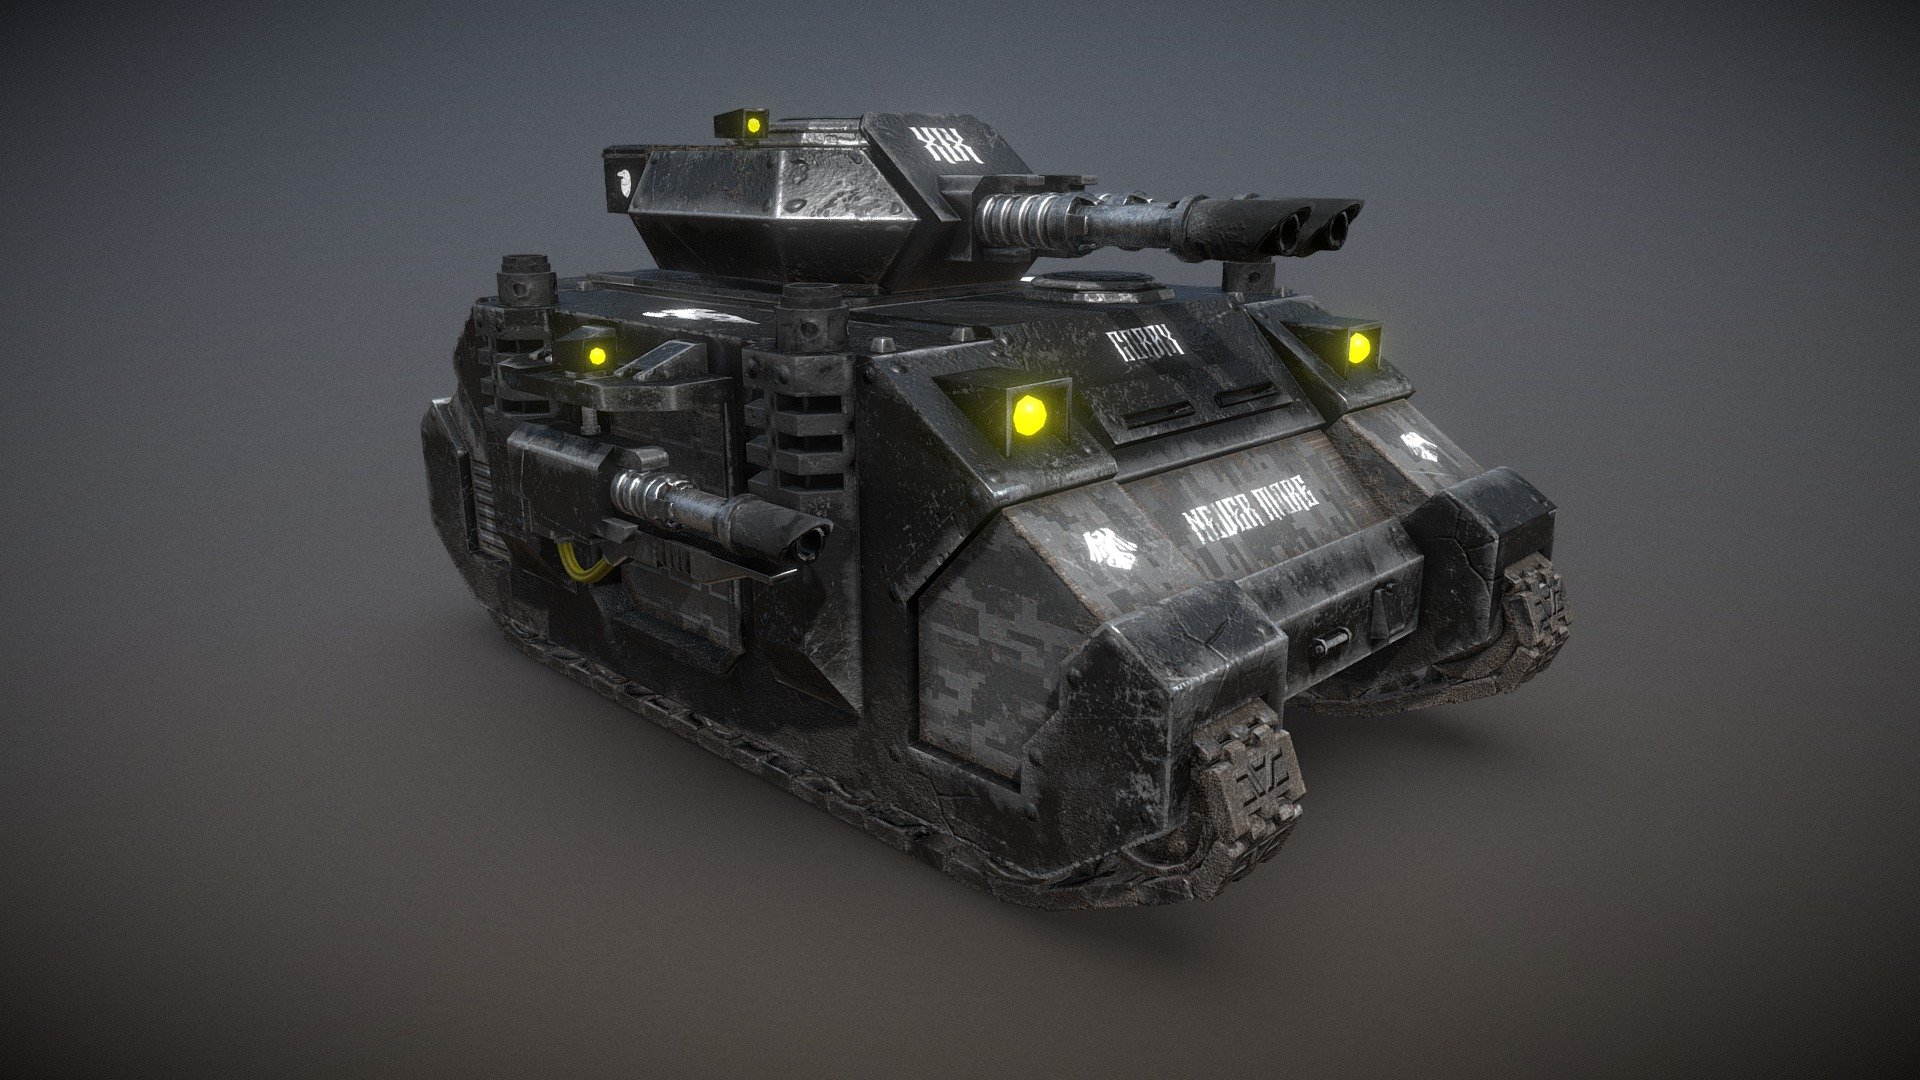 The Predator is a battle tank employed by the Space Marines. It is a more heavily armed and armoured version of the Rhino personnel carrier. There are two major patterns of Predator, the Destructor and the Annihilator, primarily distinguished by their specific weaponry - Battle Tank Predator Raven Guard Warhammer 40K - Download Free 3D model by curichenkow 3d model